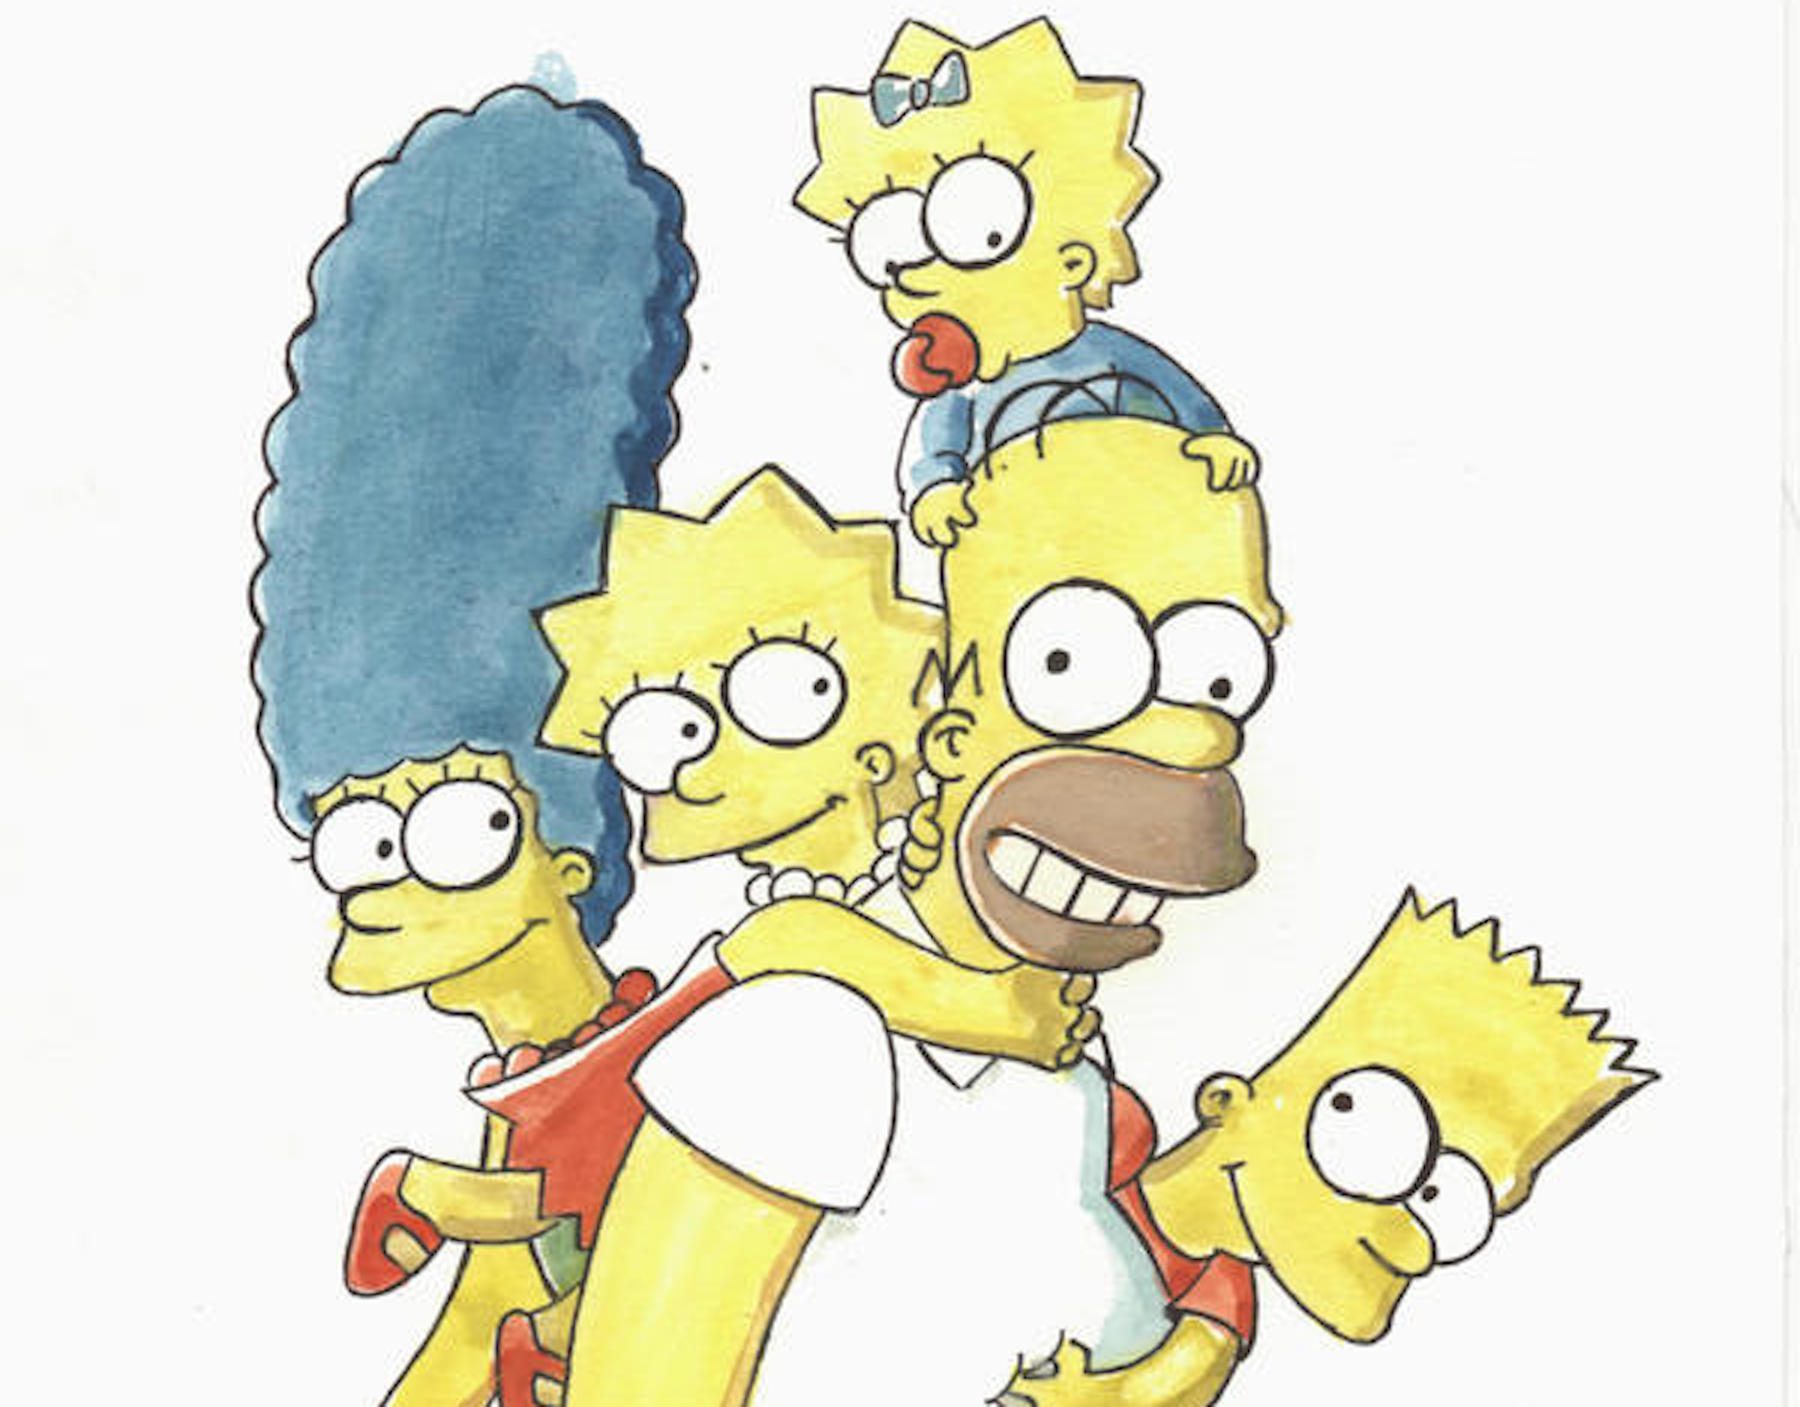 Homer, Marge, Bart, Lisa, and Maggie from the SImpsons, gathered together and smiling.